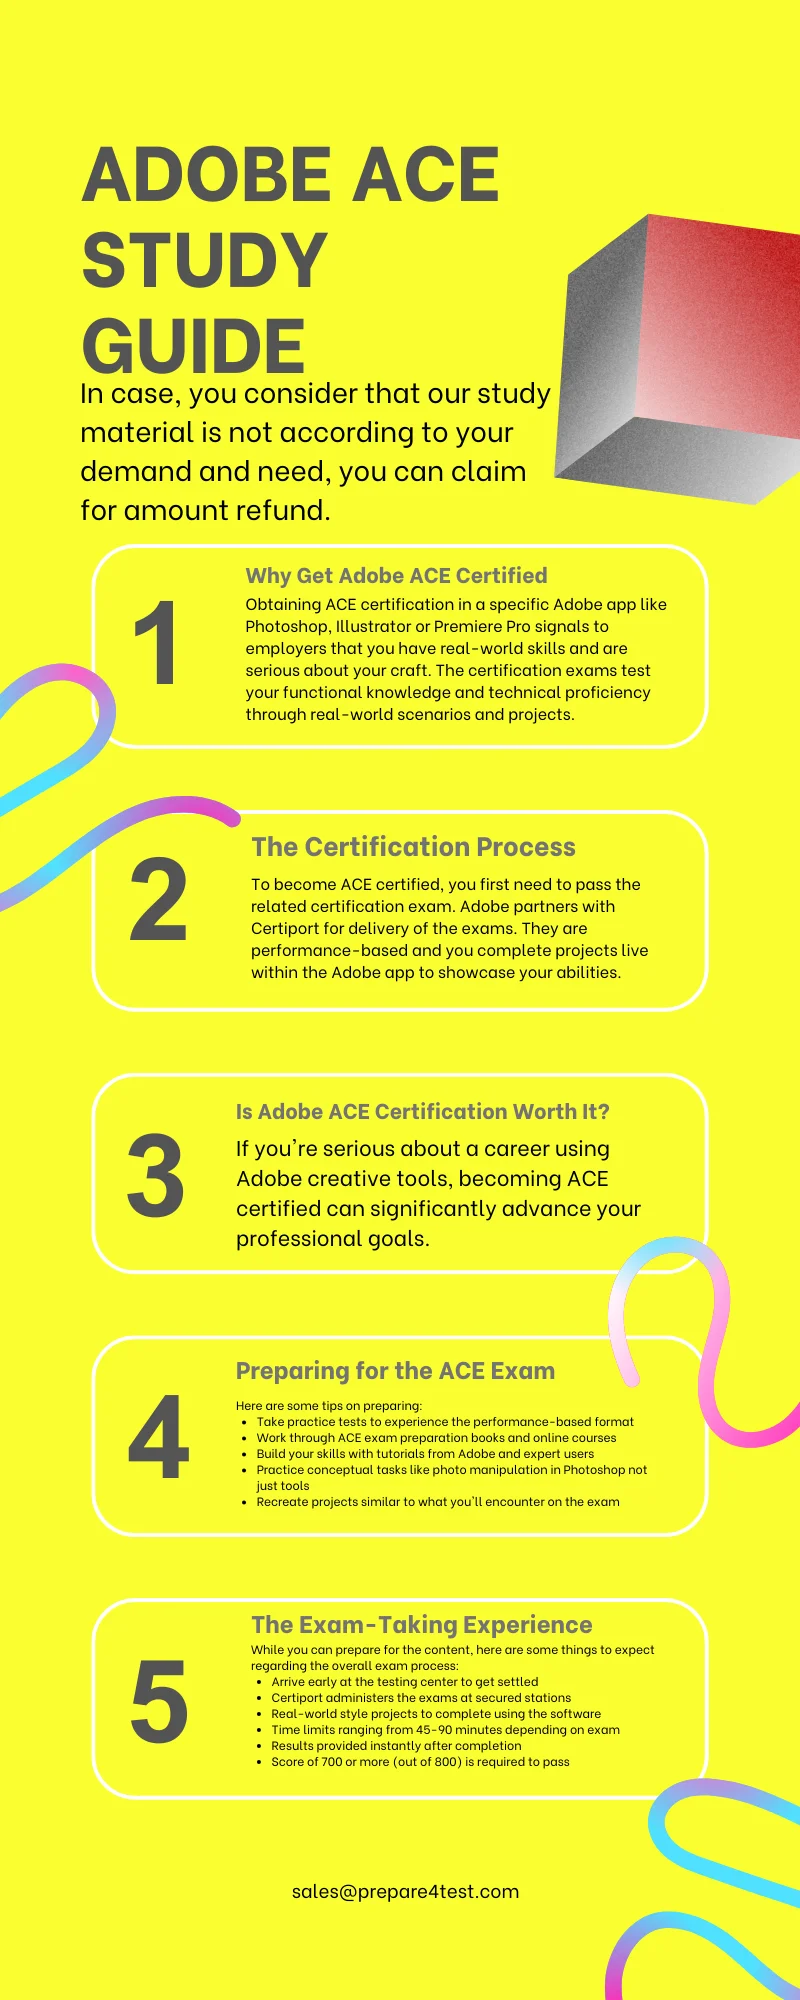 Adobe ACE Study Guide Infographic